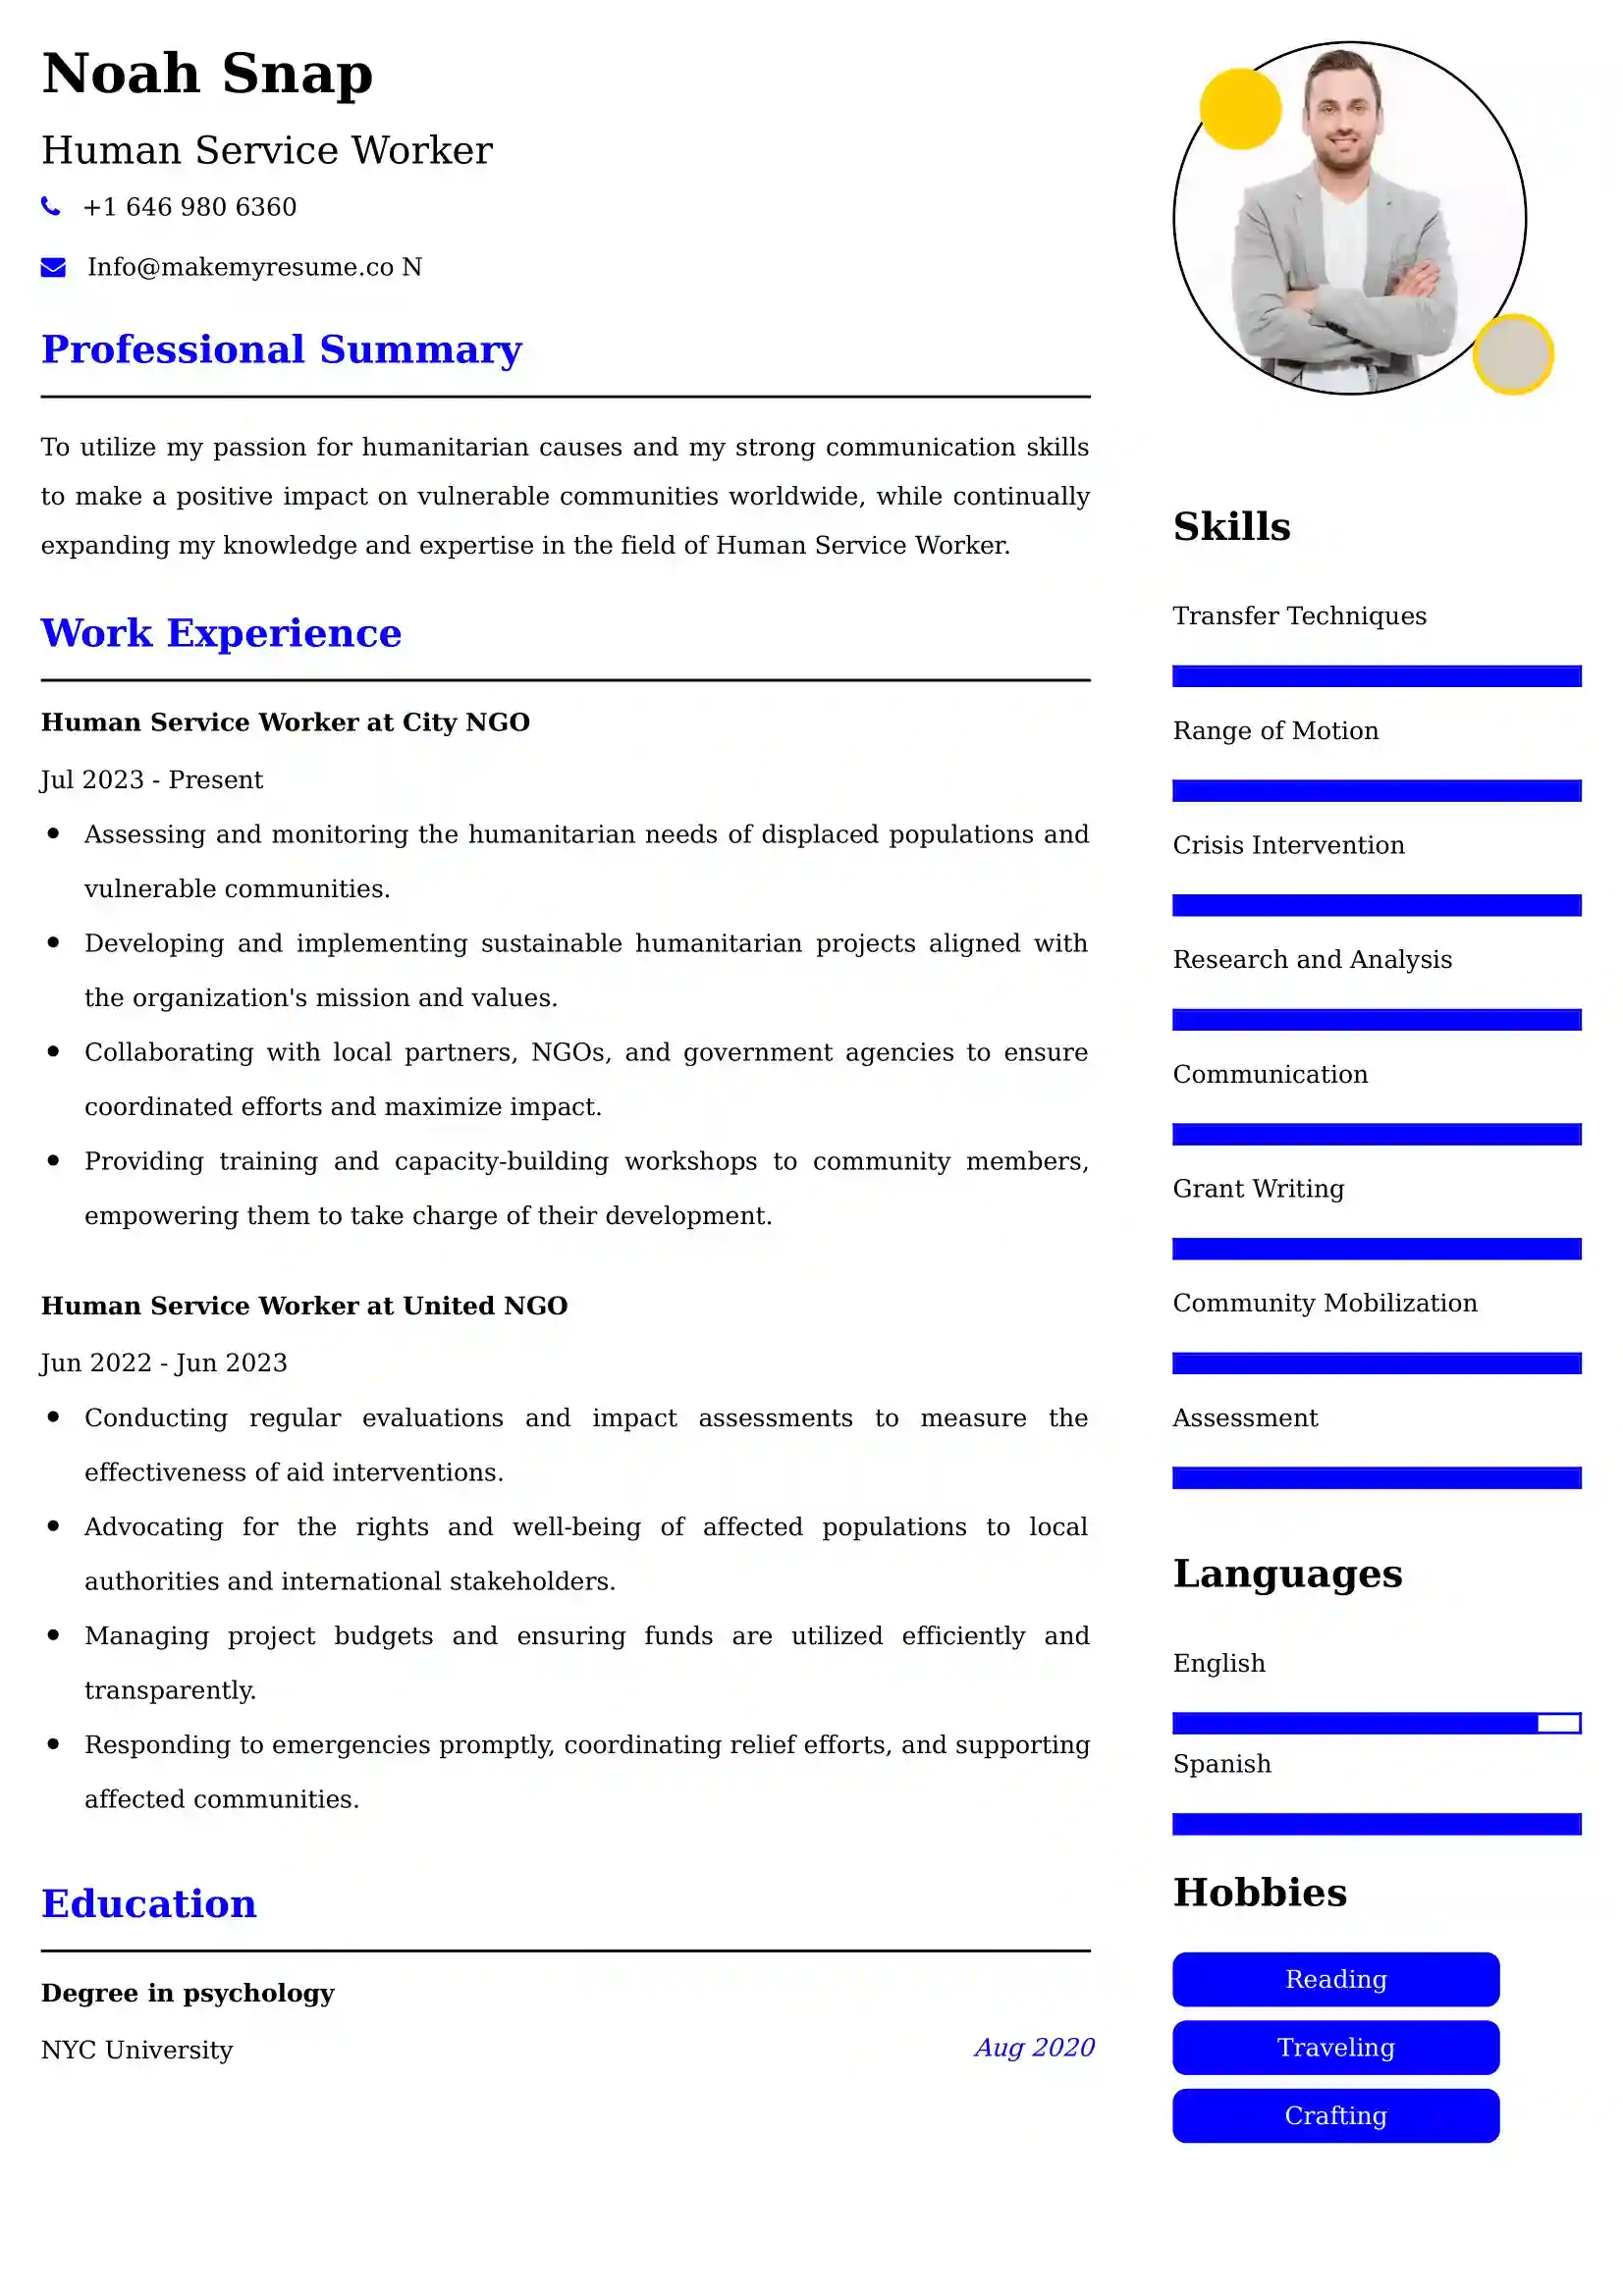 Human Service Worker Resume Examples - Brazilian Format, Latest Template